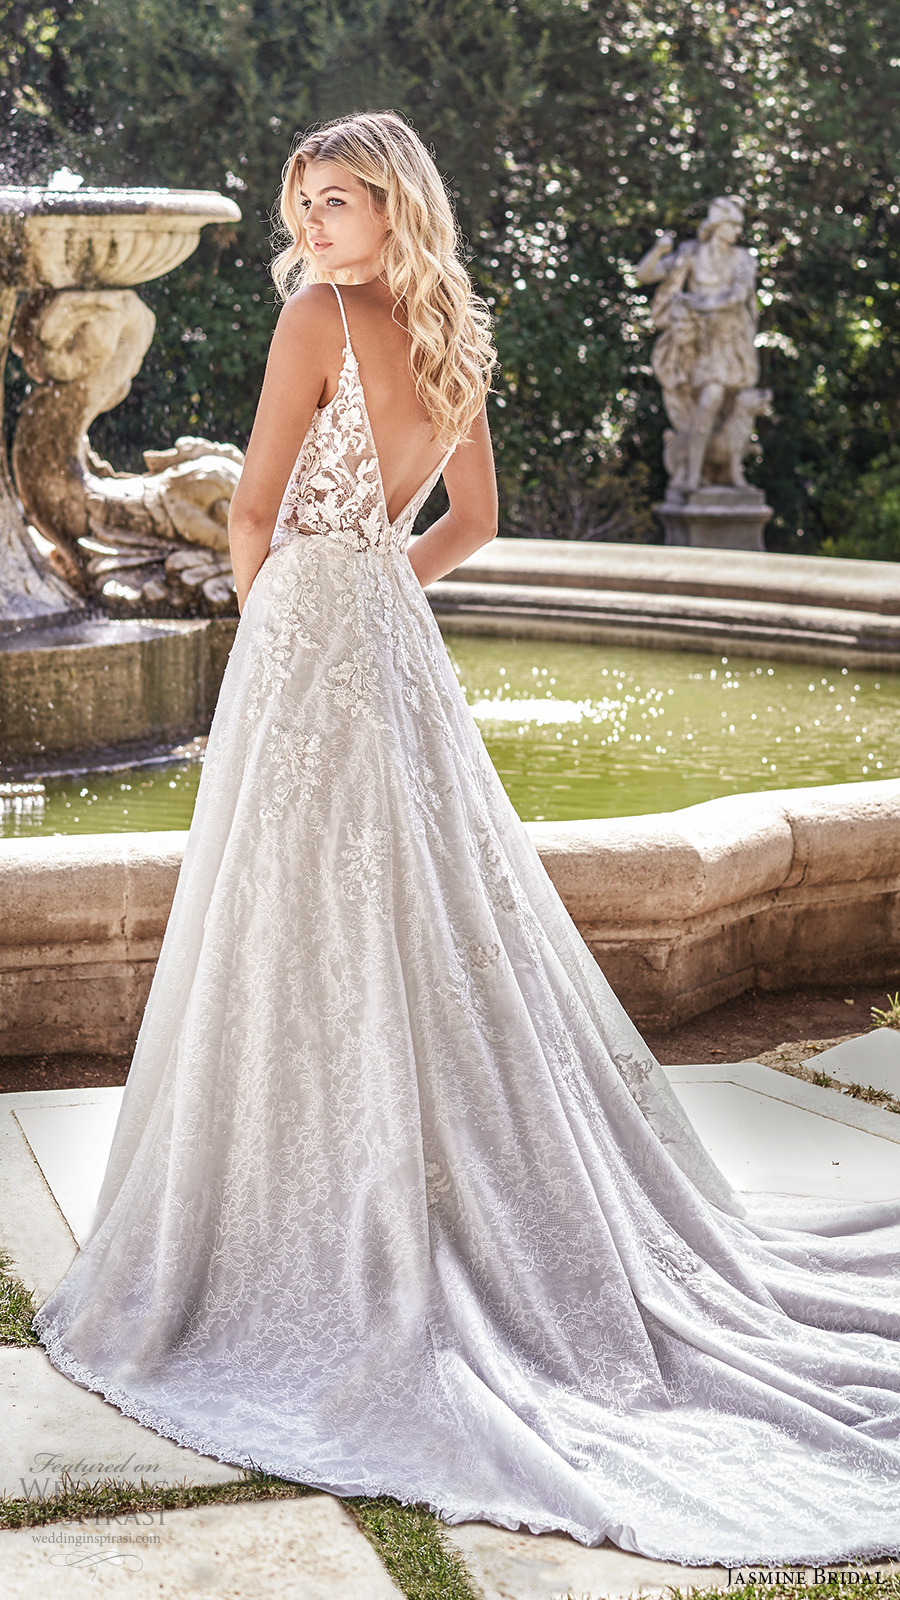 jasmine spring 2020 collection sleeveless thin straps plunging sweetheart neckline fully embellished a line ball gown wedding dress chapel train (8) bv